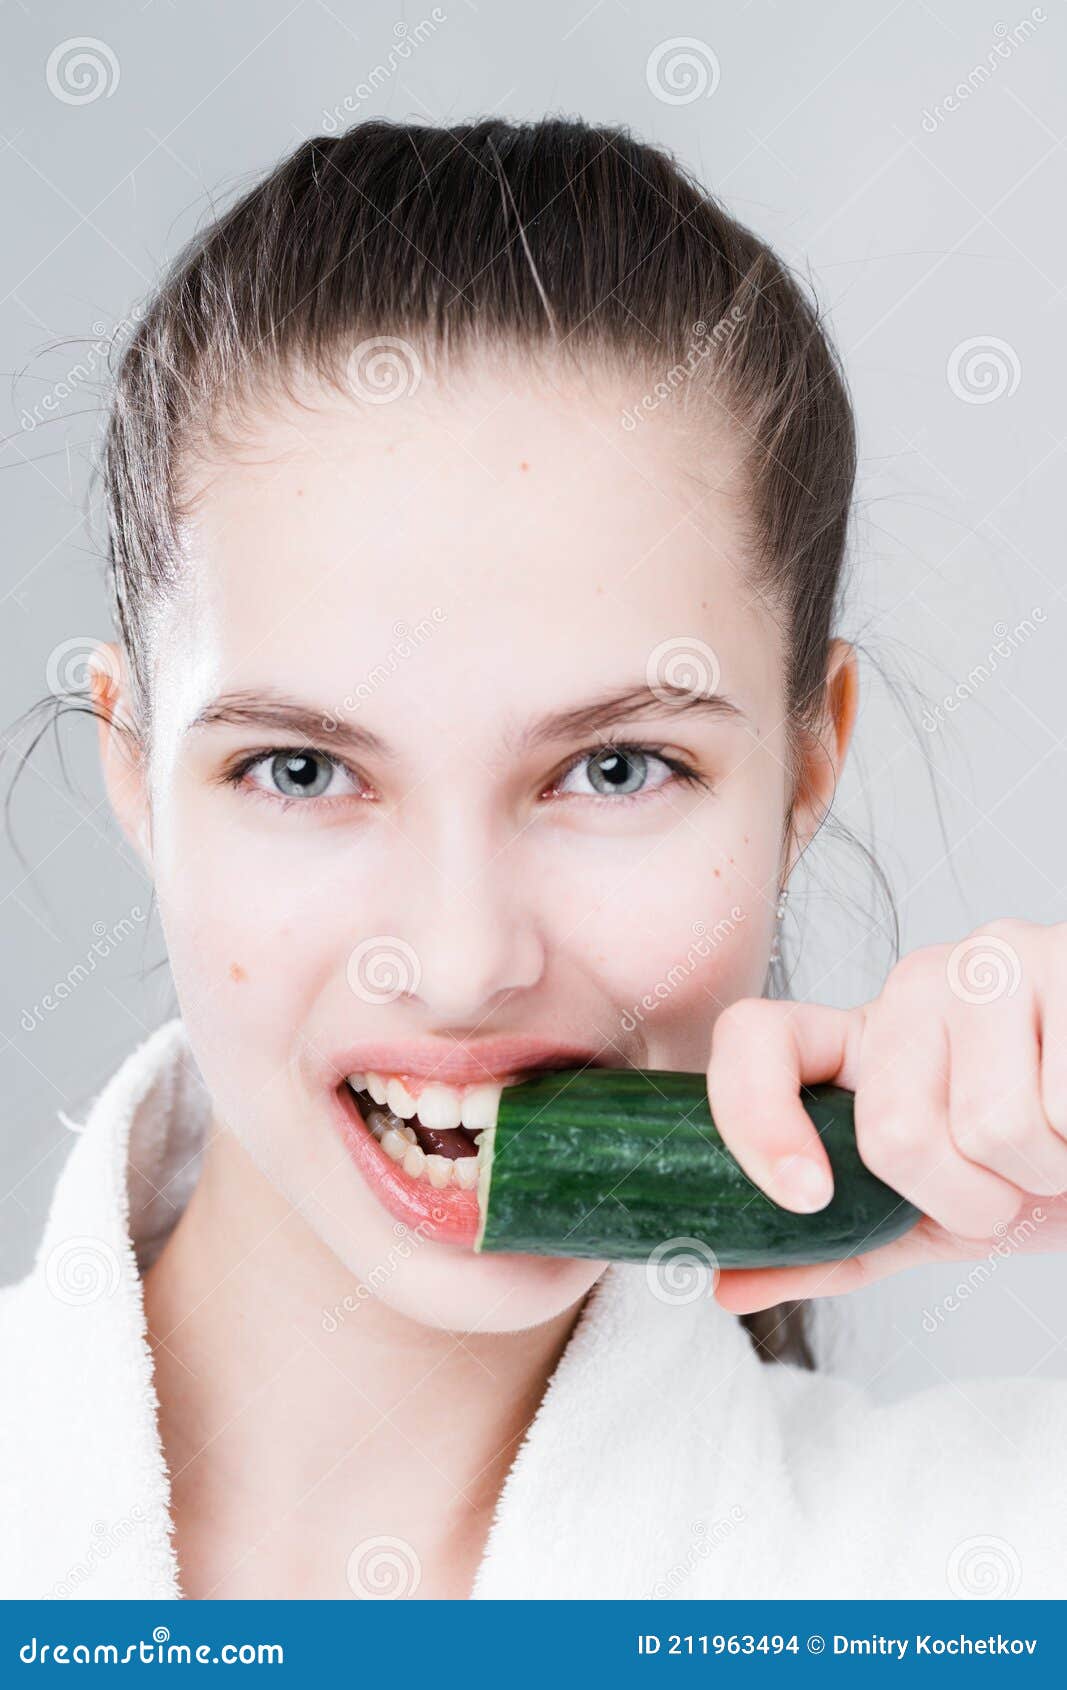 Black Players Sexy Girl Holding Cucumbers